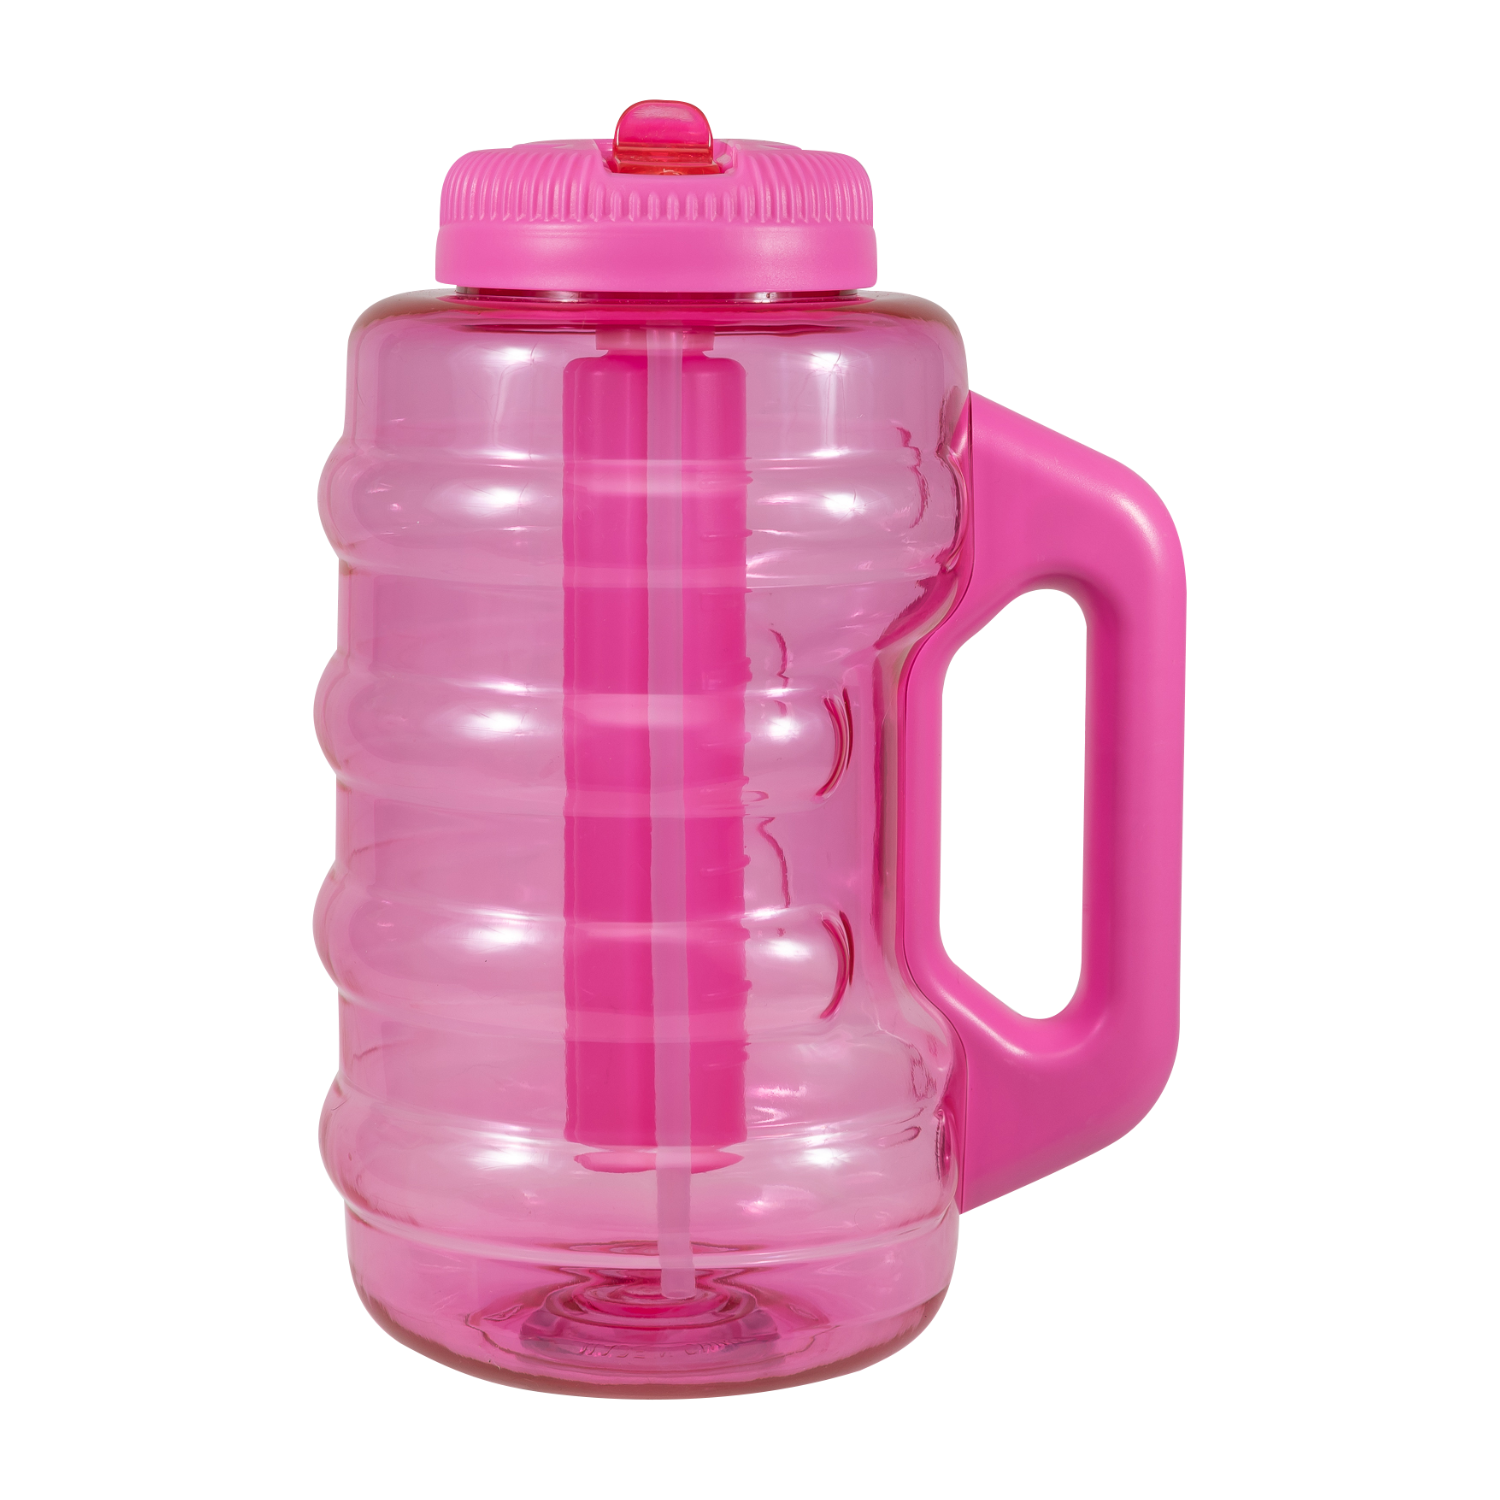 100 oz COOL GEAR BEAST Jug with Patented Freezer Stick and Handle - image 1 of 4